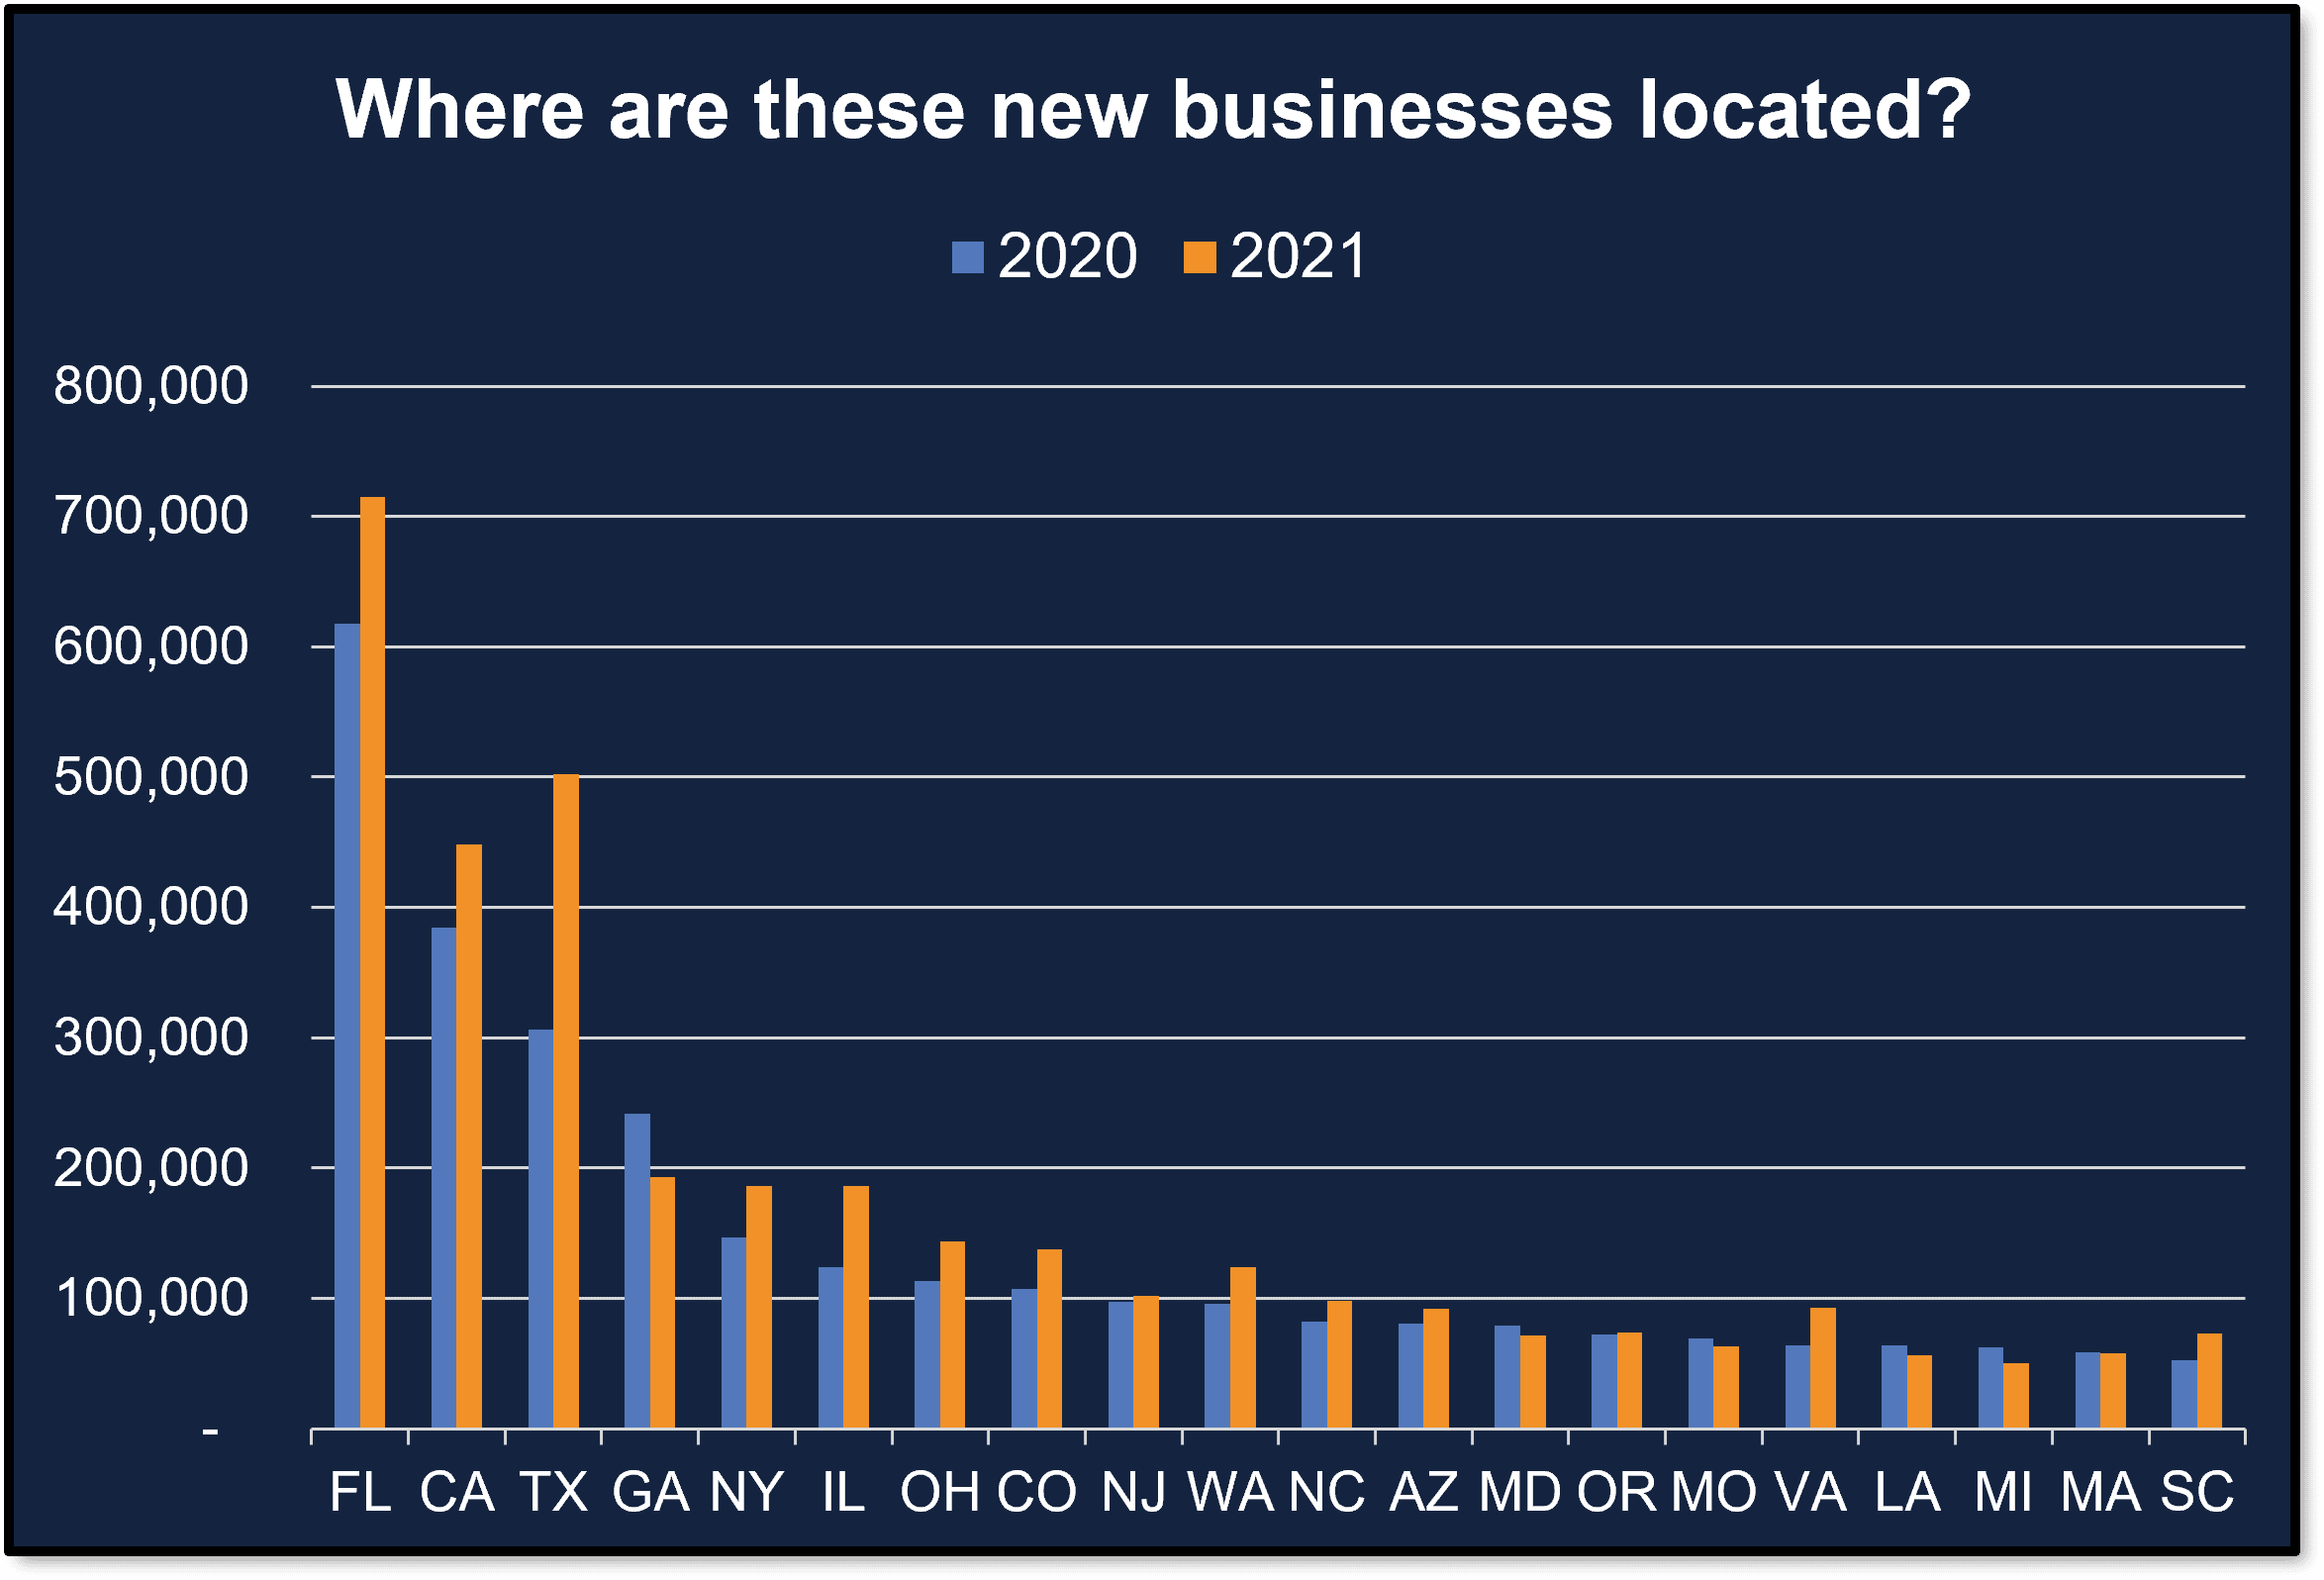 Where are these new businesses located